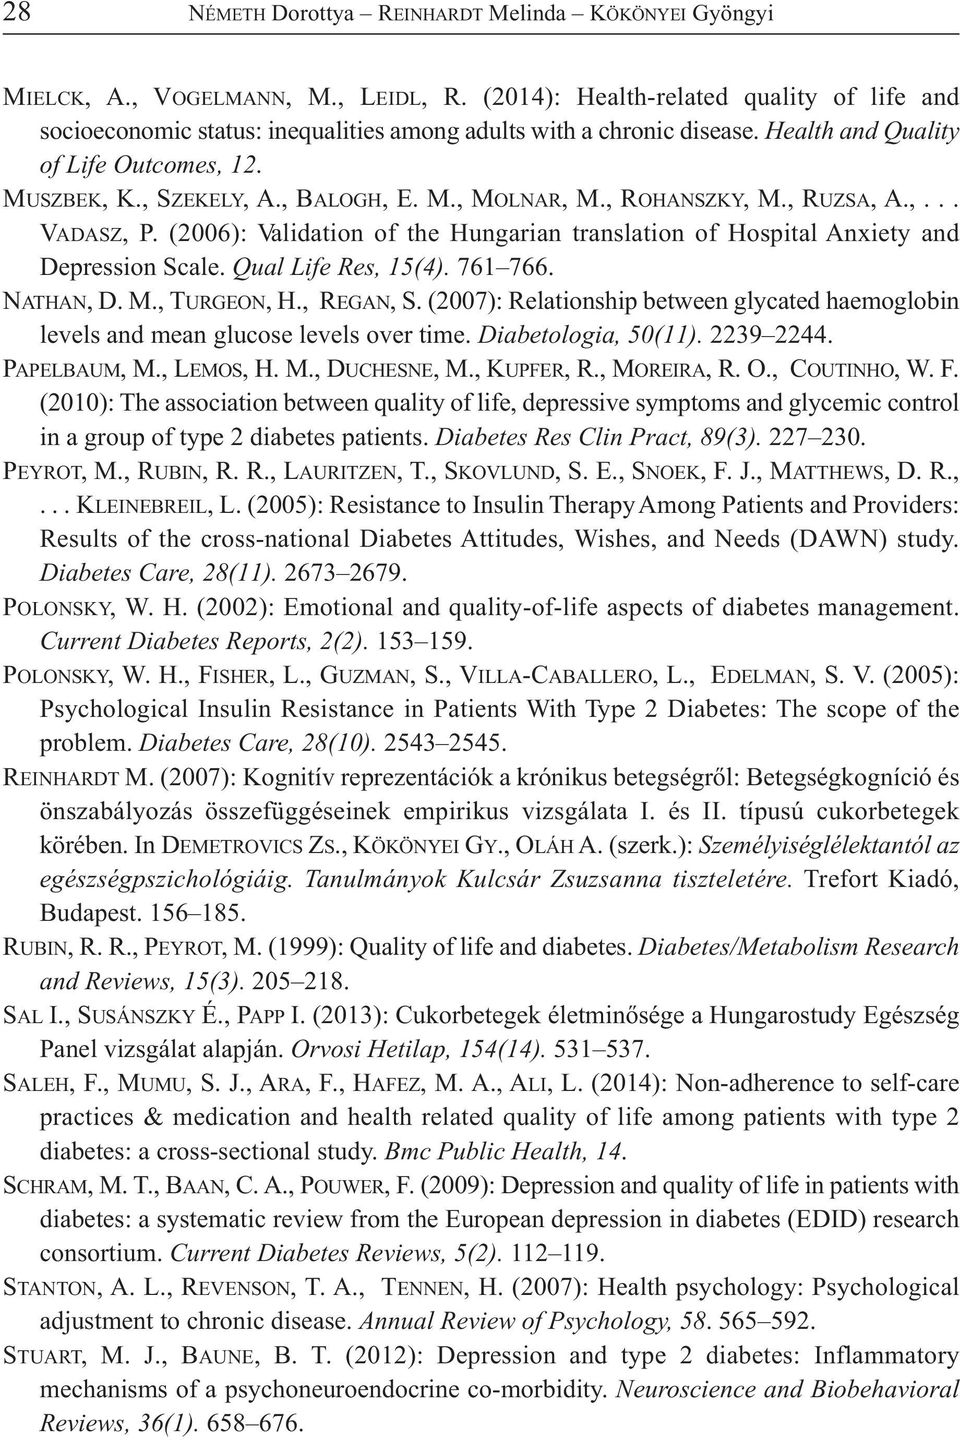 , ROHANSZKY, M., RUZSA, A.,... VADASZ, P. (2006): Validation of the Hungarian translation of Hospital Anxiety and Depression Scale. Qual Life Res, 15(4). 761 766. NATHAN, D. M., TURGEON, H., REGAN, S.